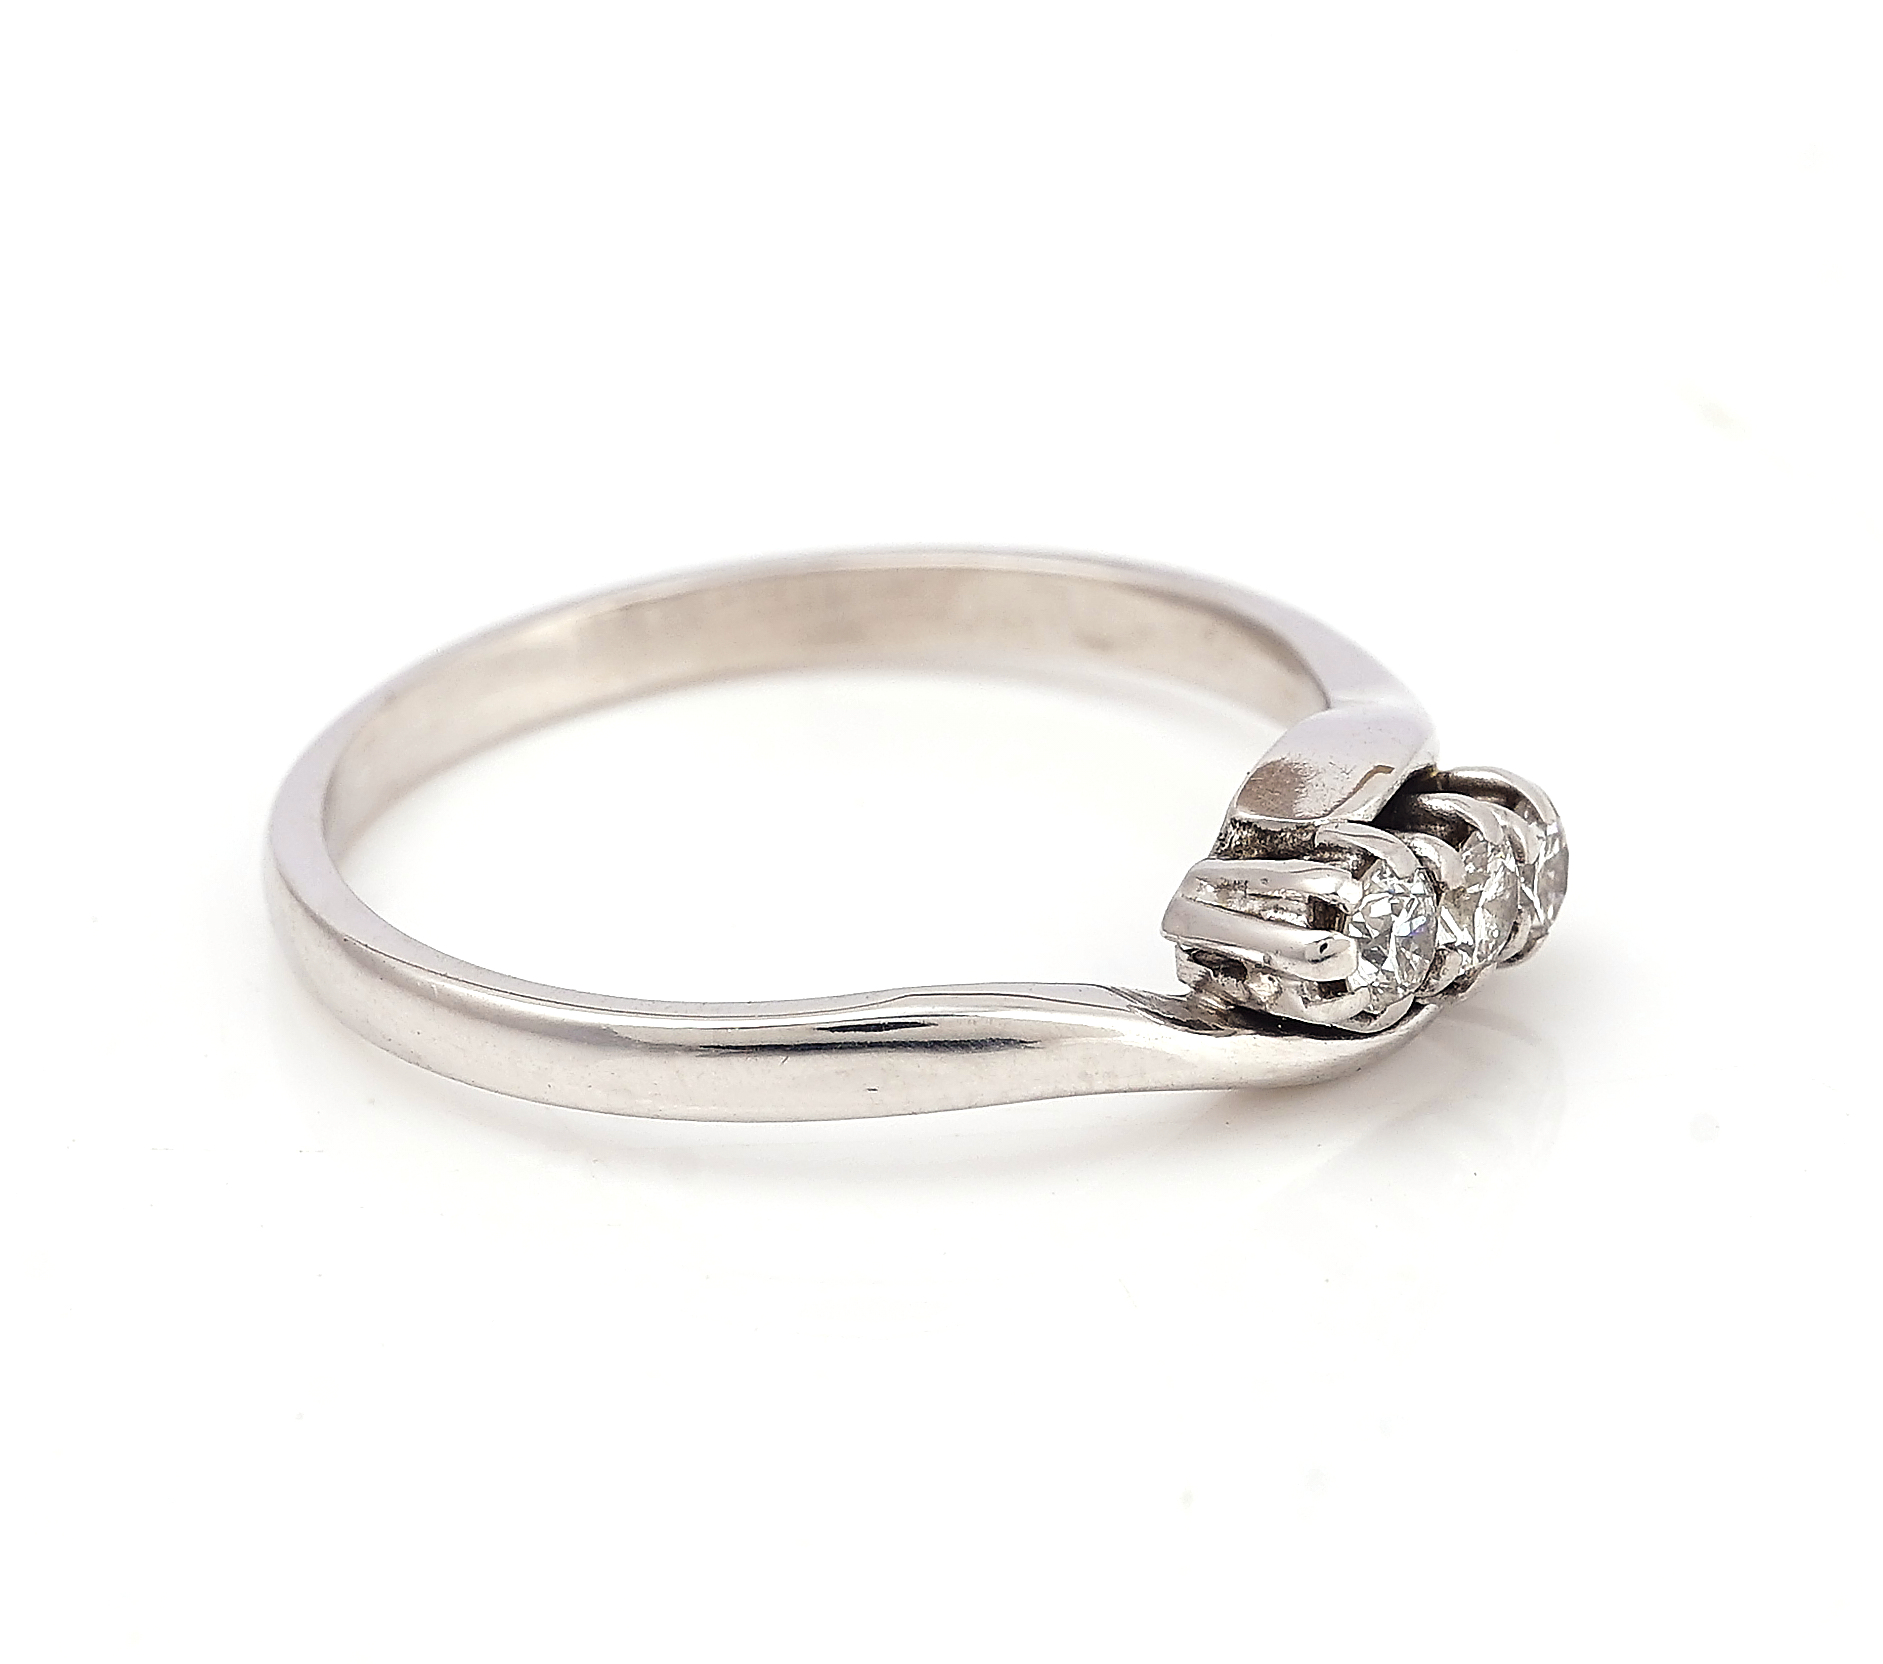 AN 18CT WHITE GOLD AND DIAMOND THREE STONE RING - Image 2 of 2